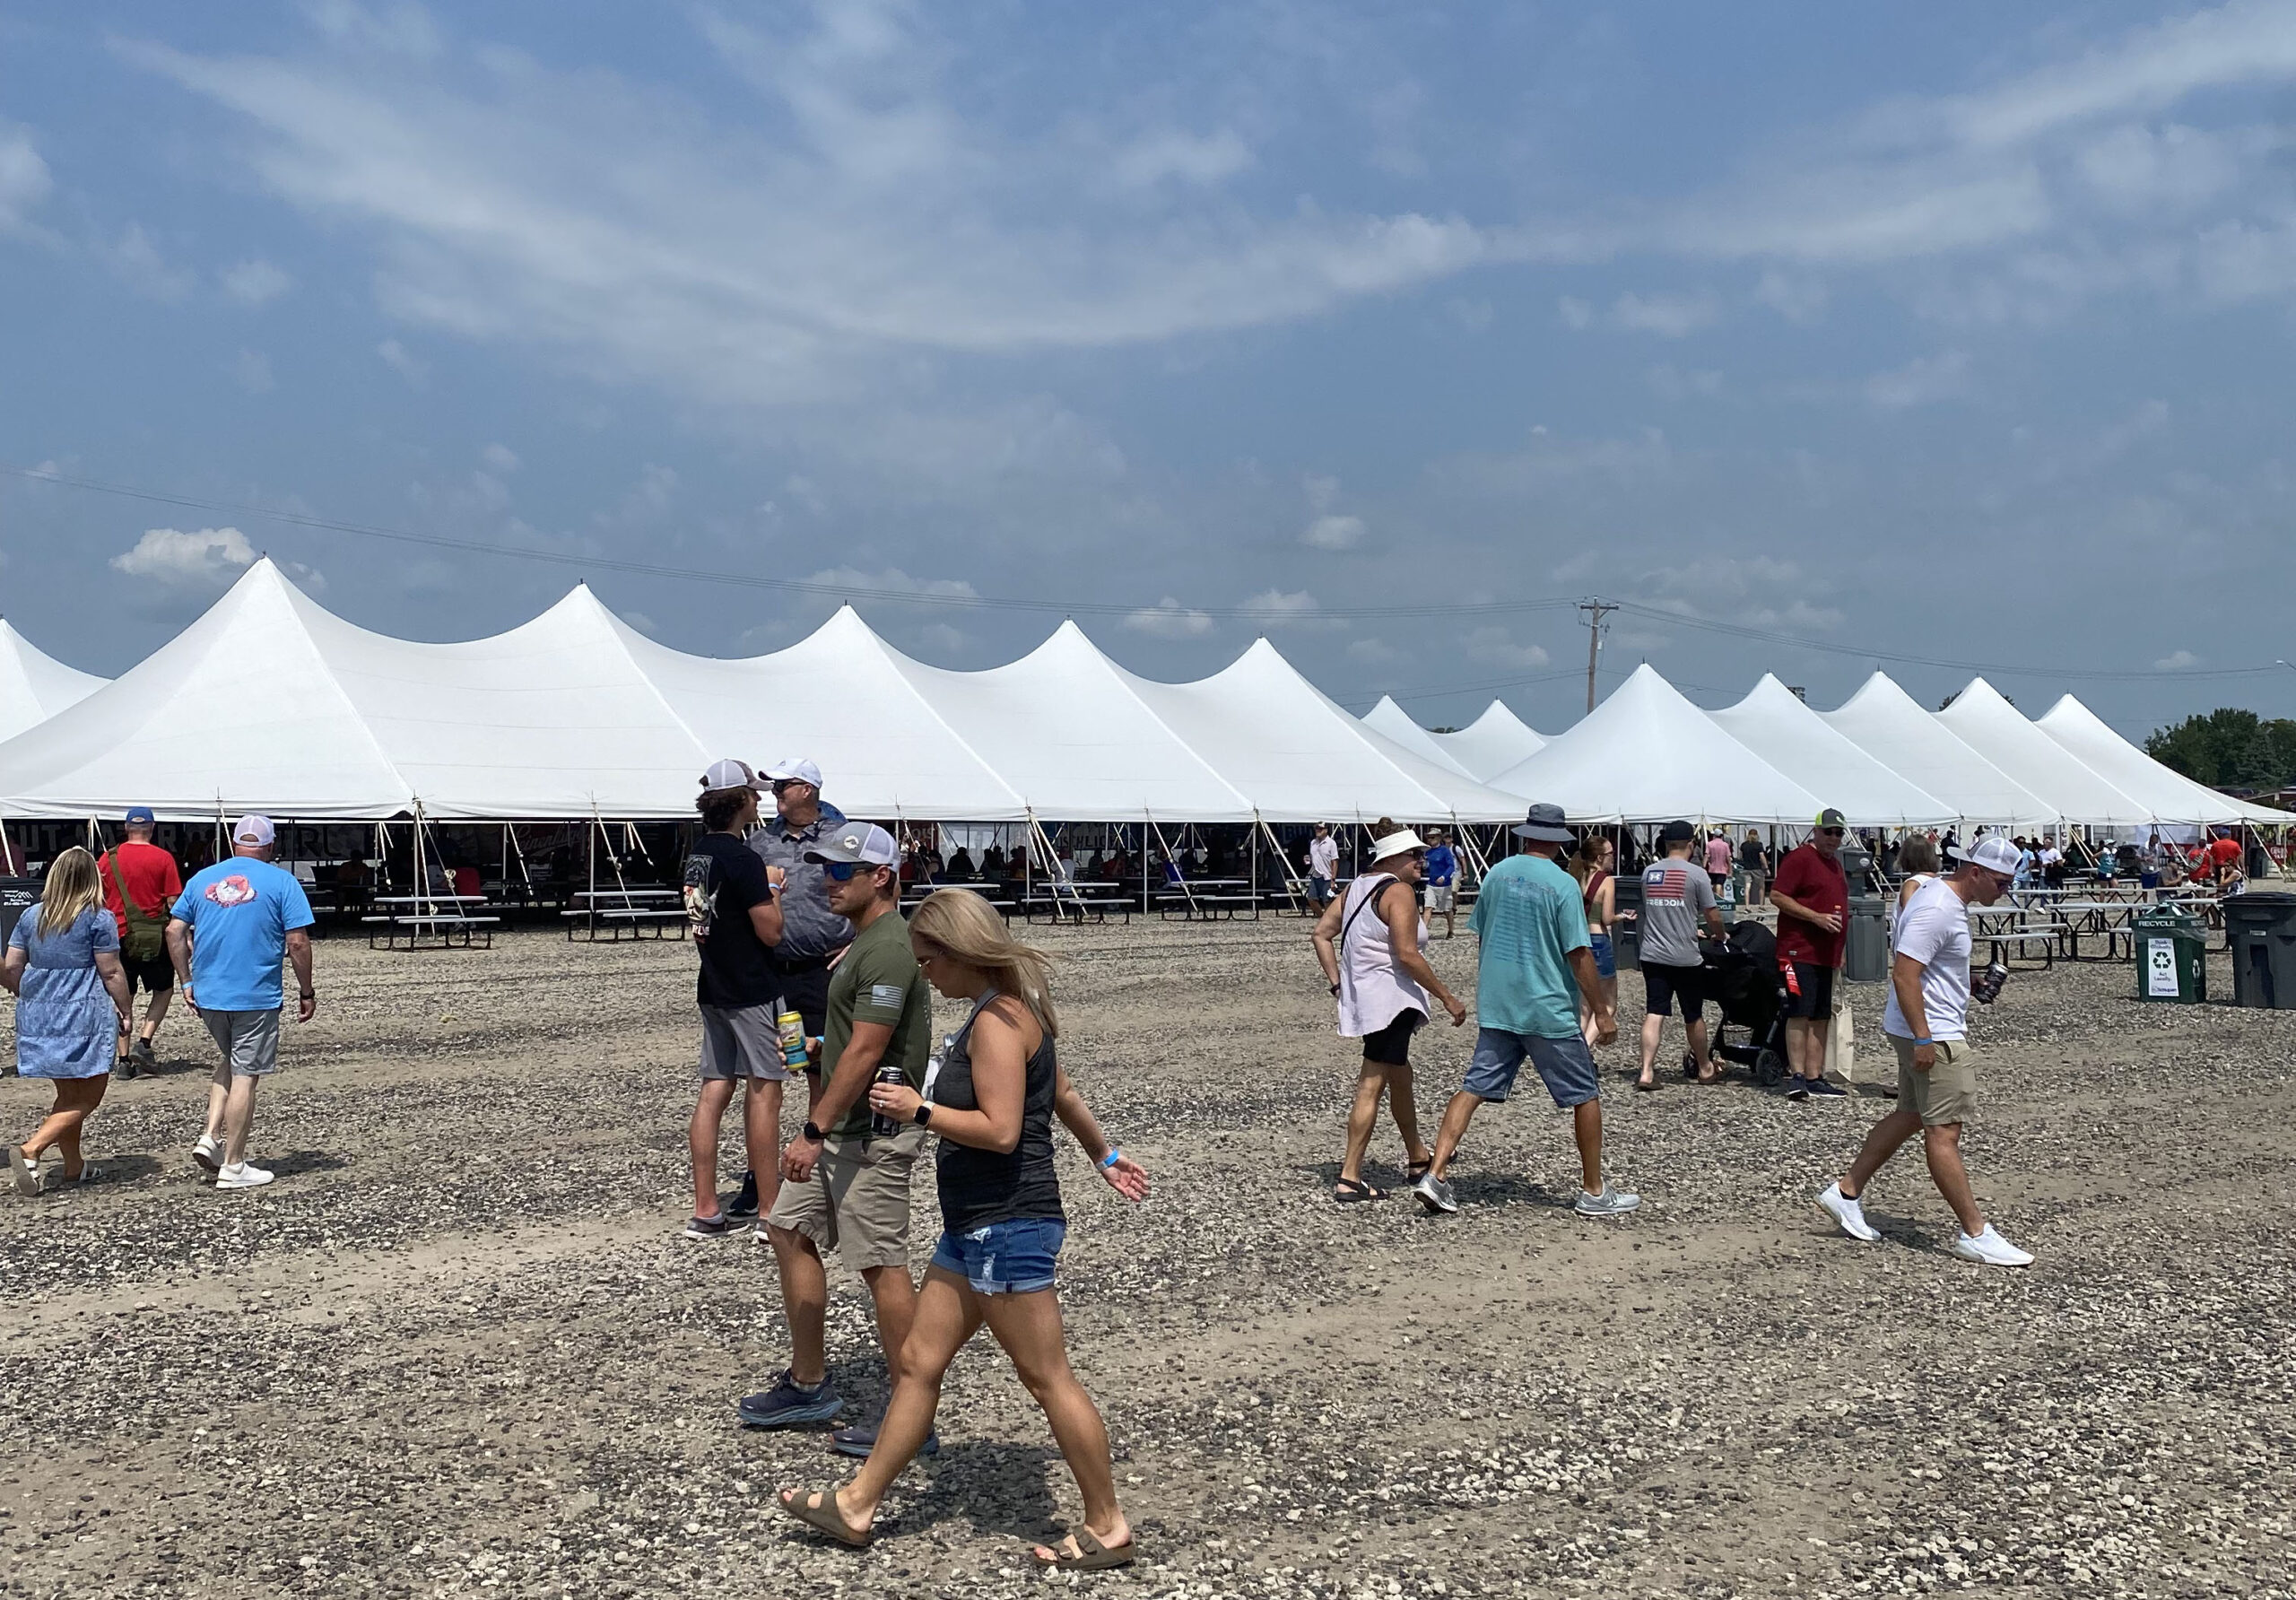 Multiple 40' x 120' rope and pole tents at the Iowa Speedway in Newton, Iowa for Hy-Vee IndyCar Races